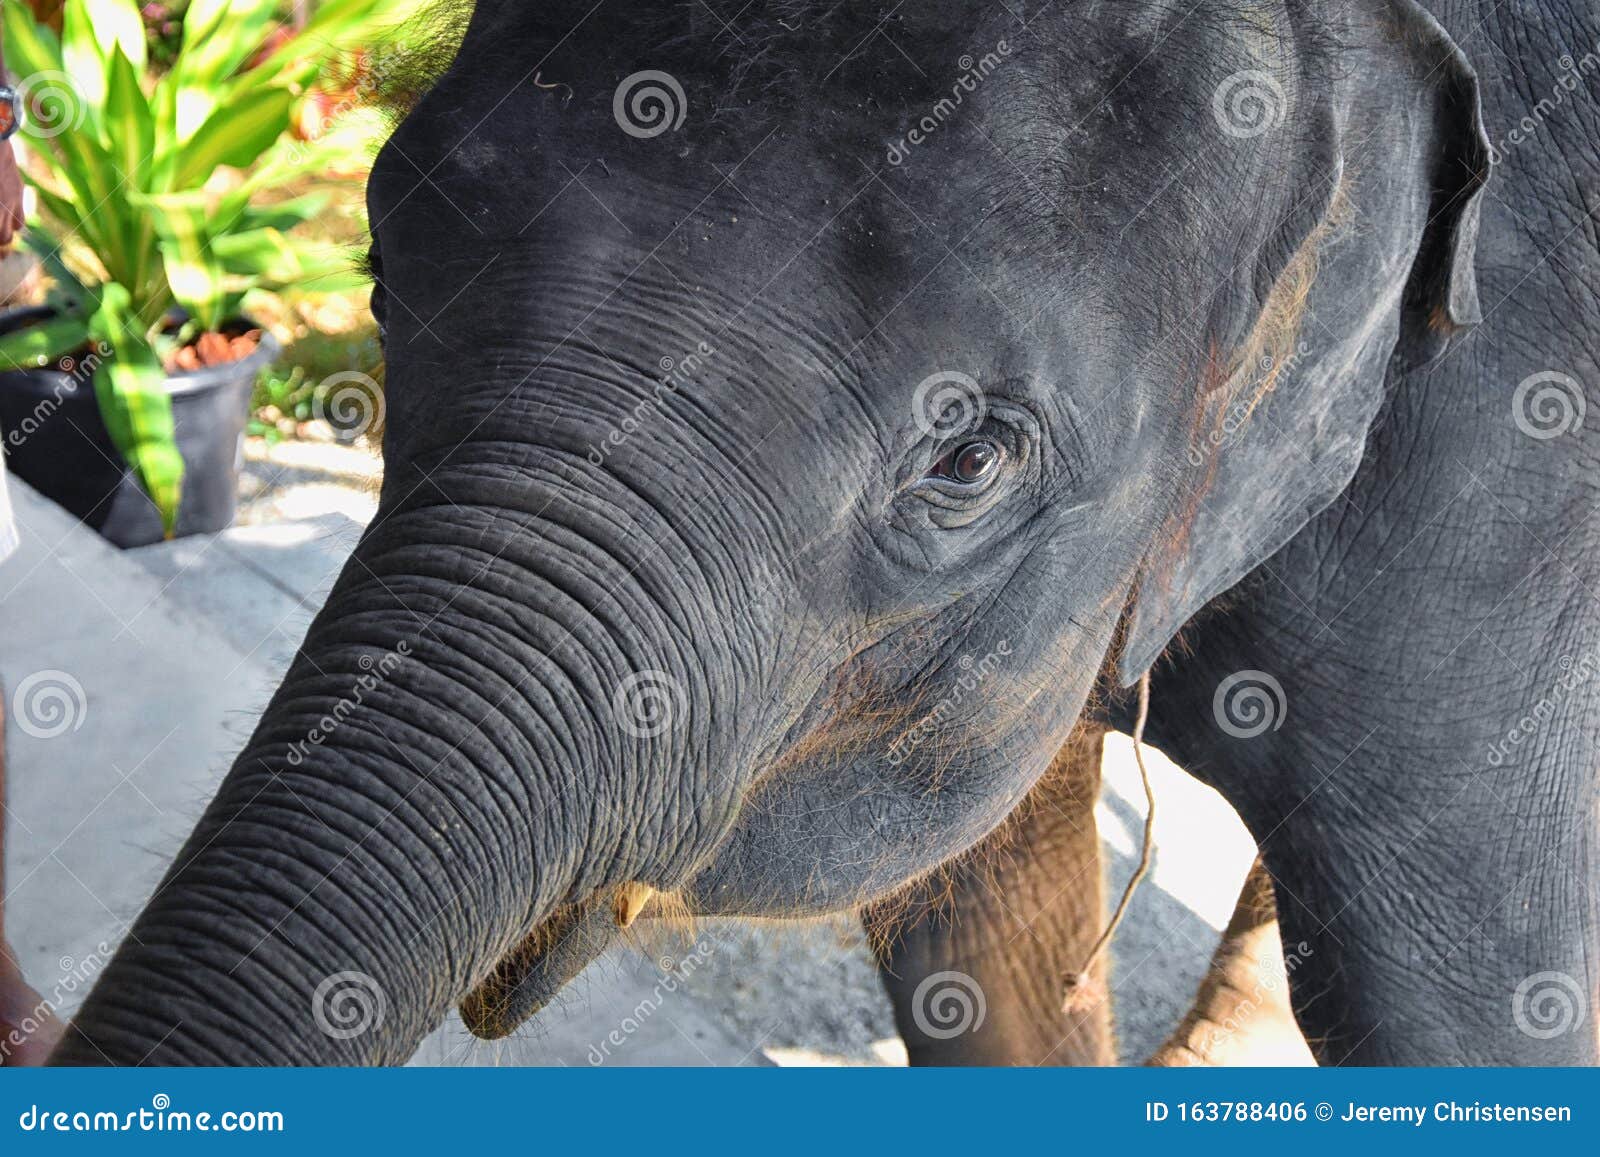 baby elephant, elephas maximus, rescued, healing to be reintroduced into the wild, close up view in protected park, herbivorous an